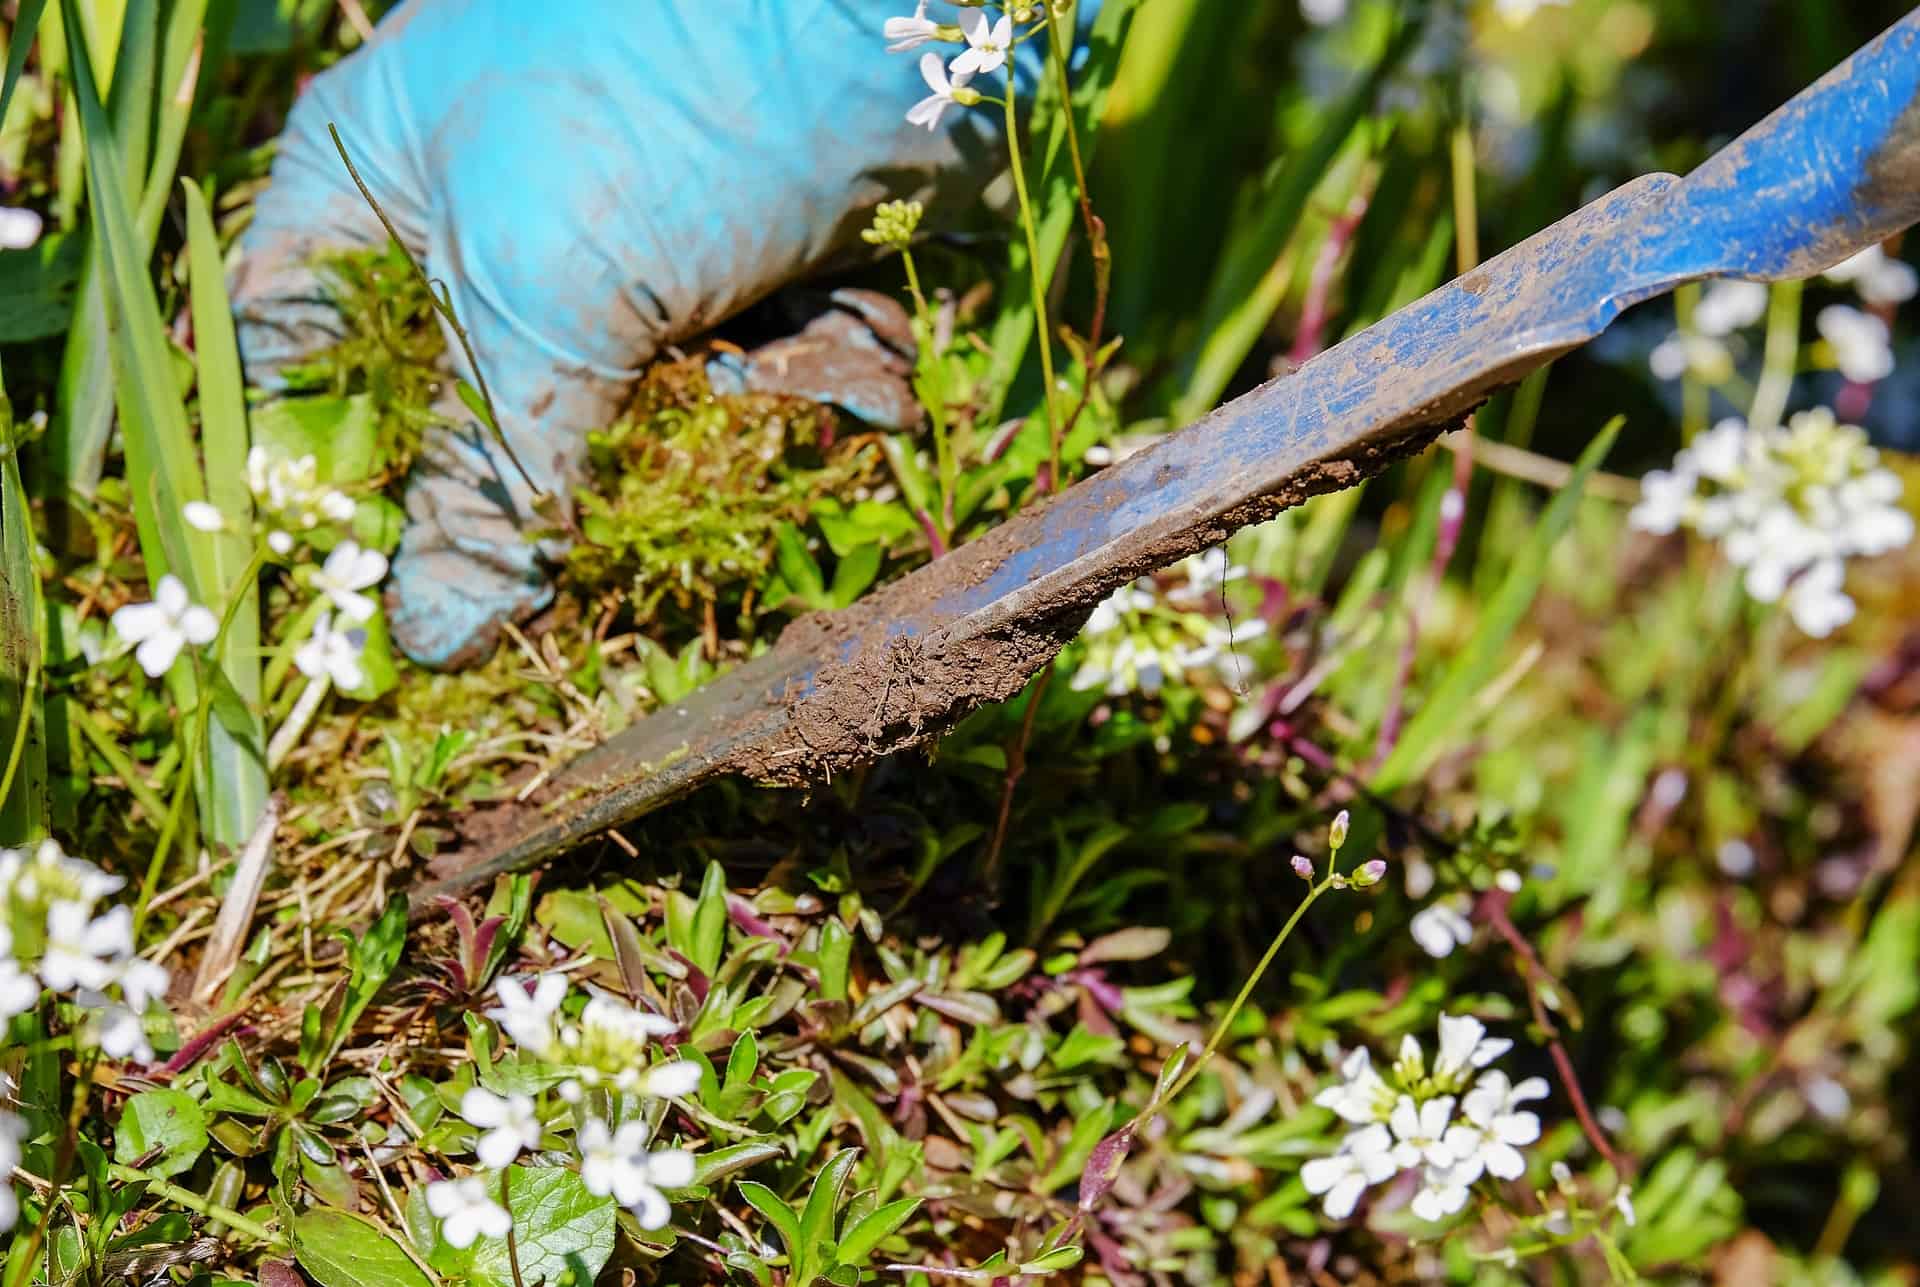 The Weed Picker Tool: How to Get Rid of Weeds in the Garden